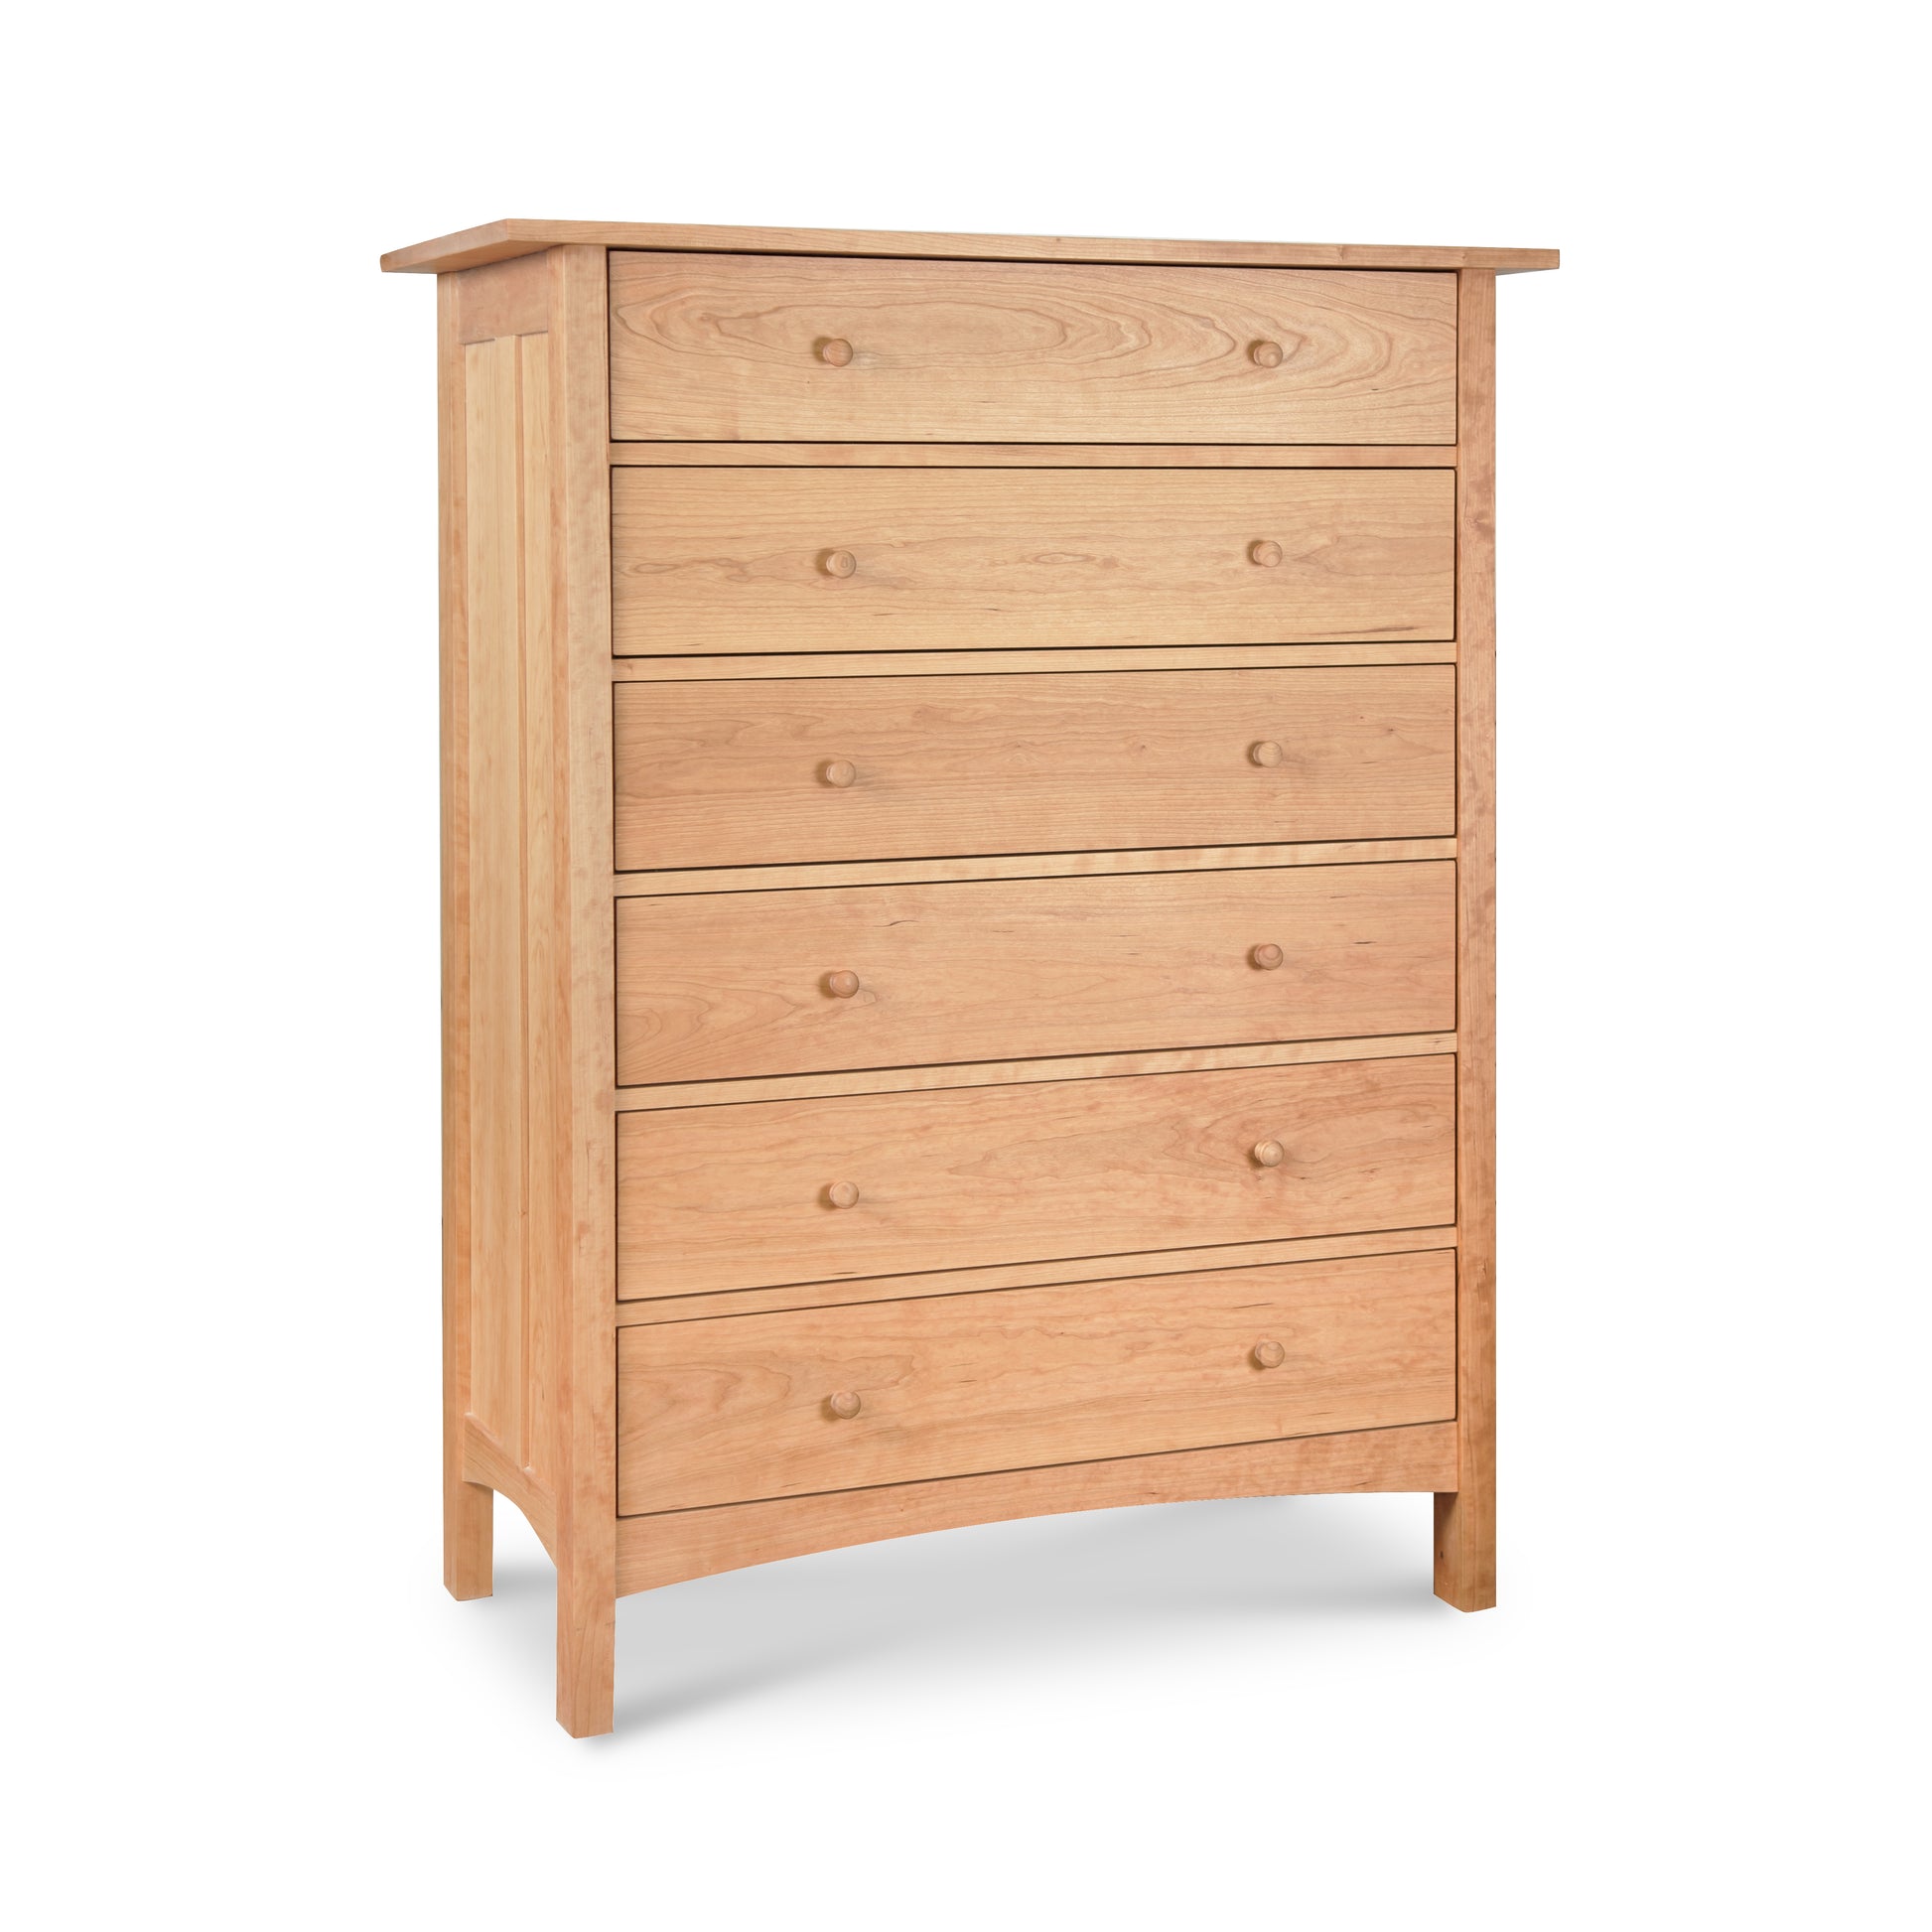 A solid wood six-drawer Vermont Furniture Designs Burlington Shaker Chest on a white background.